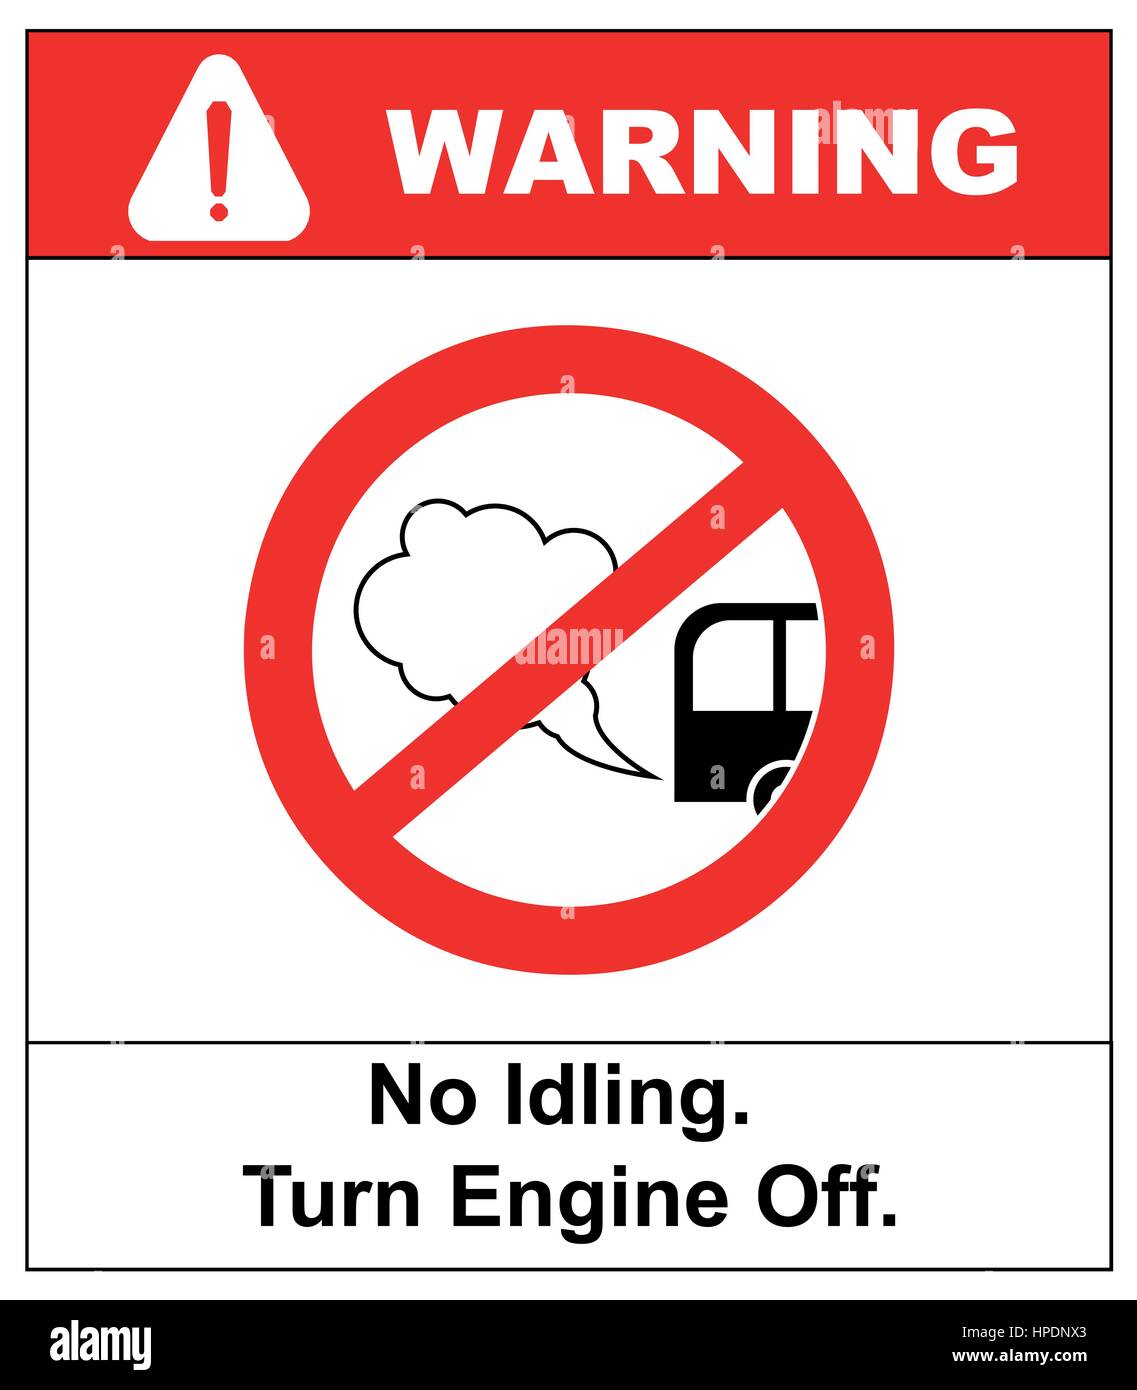 No idling or idle reduction sign on white background. vector illustration. turn engine off. prohibition symbol in red circle isolated on white. Stock Vector